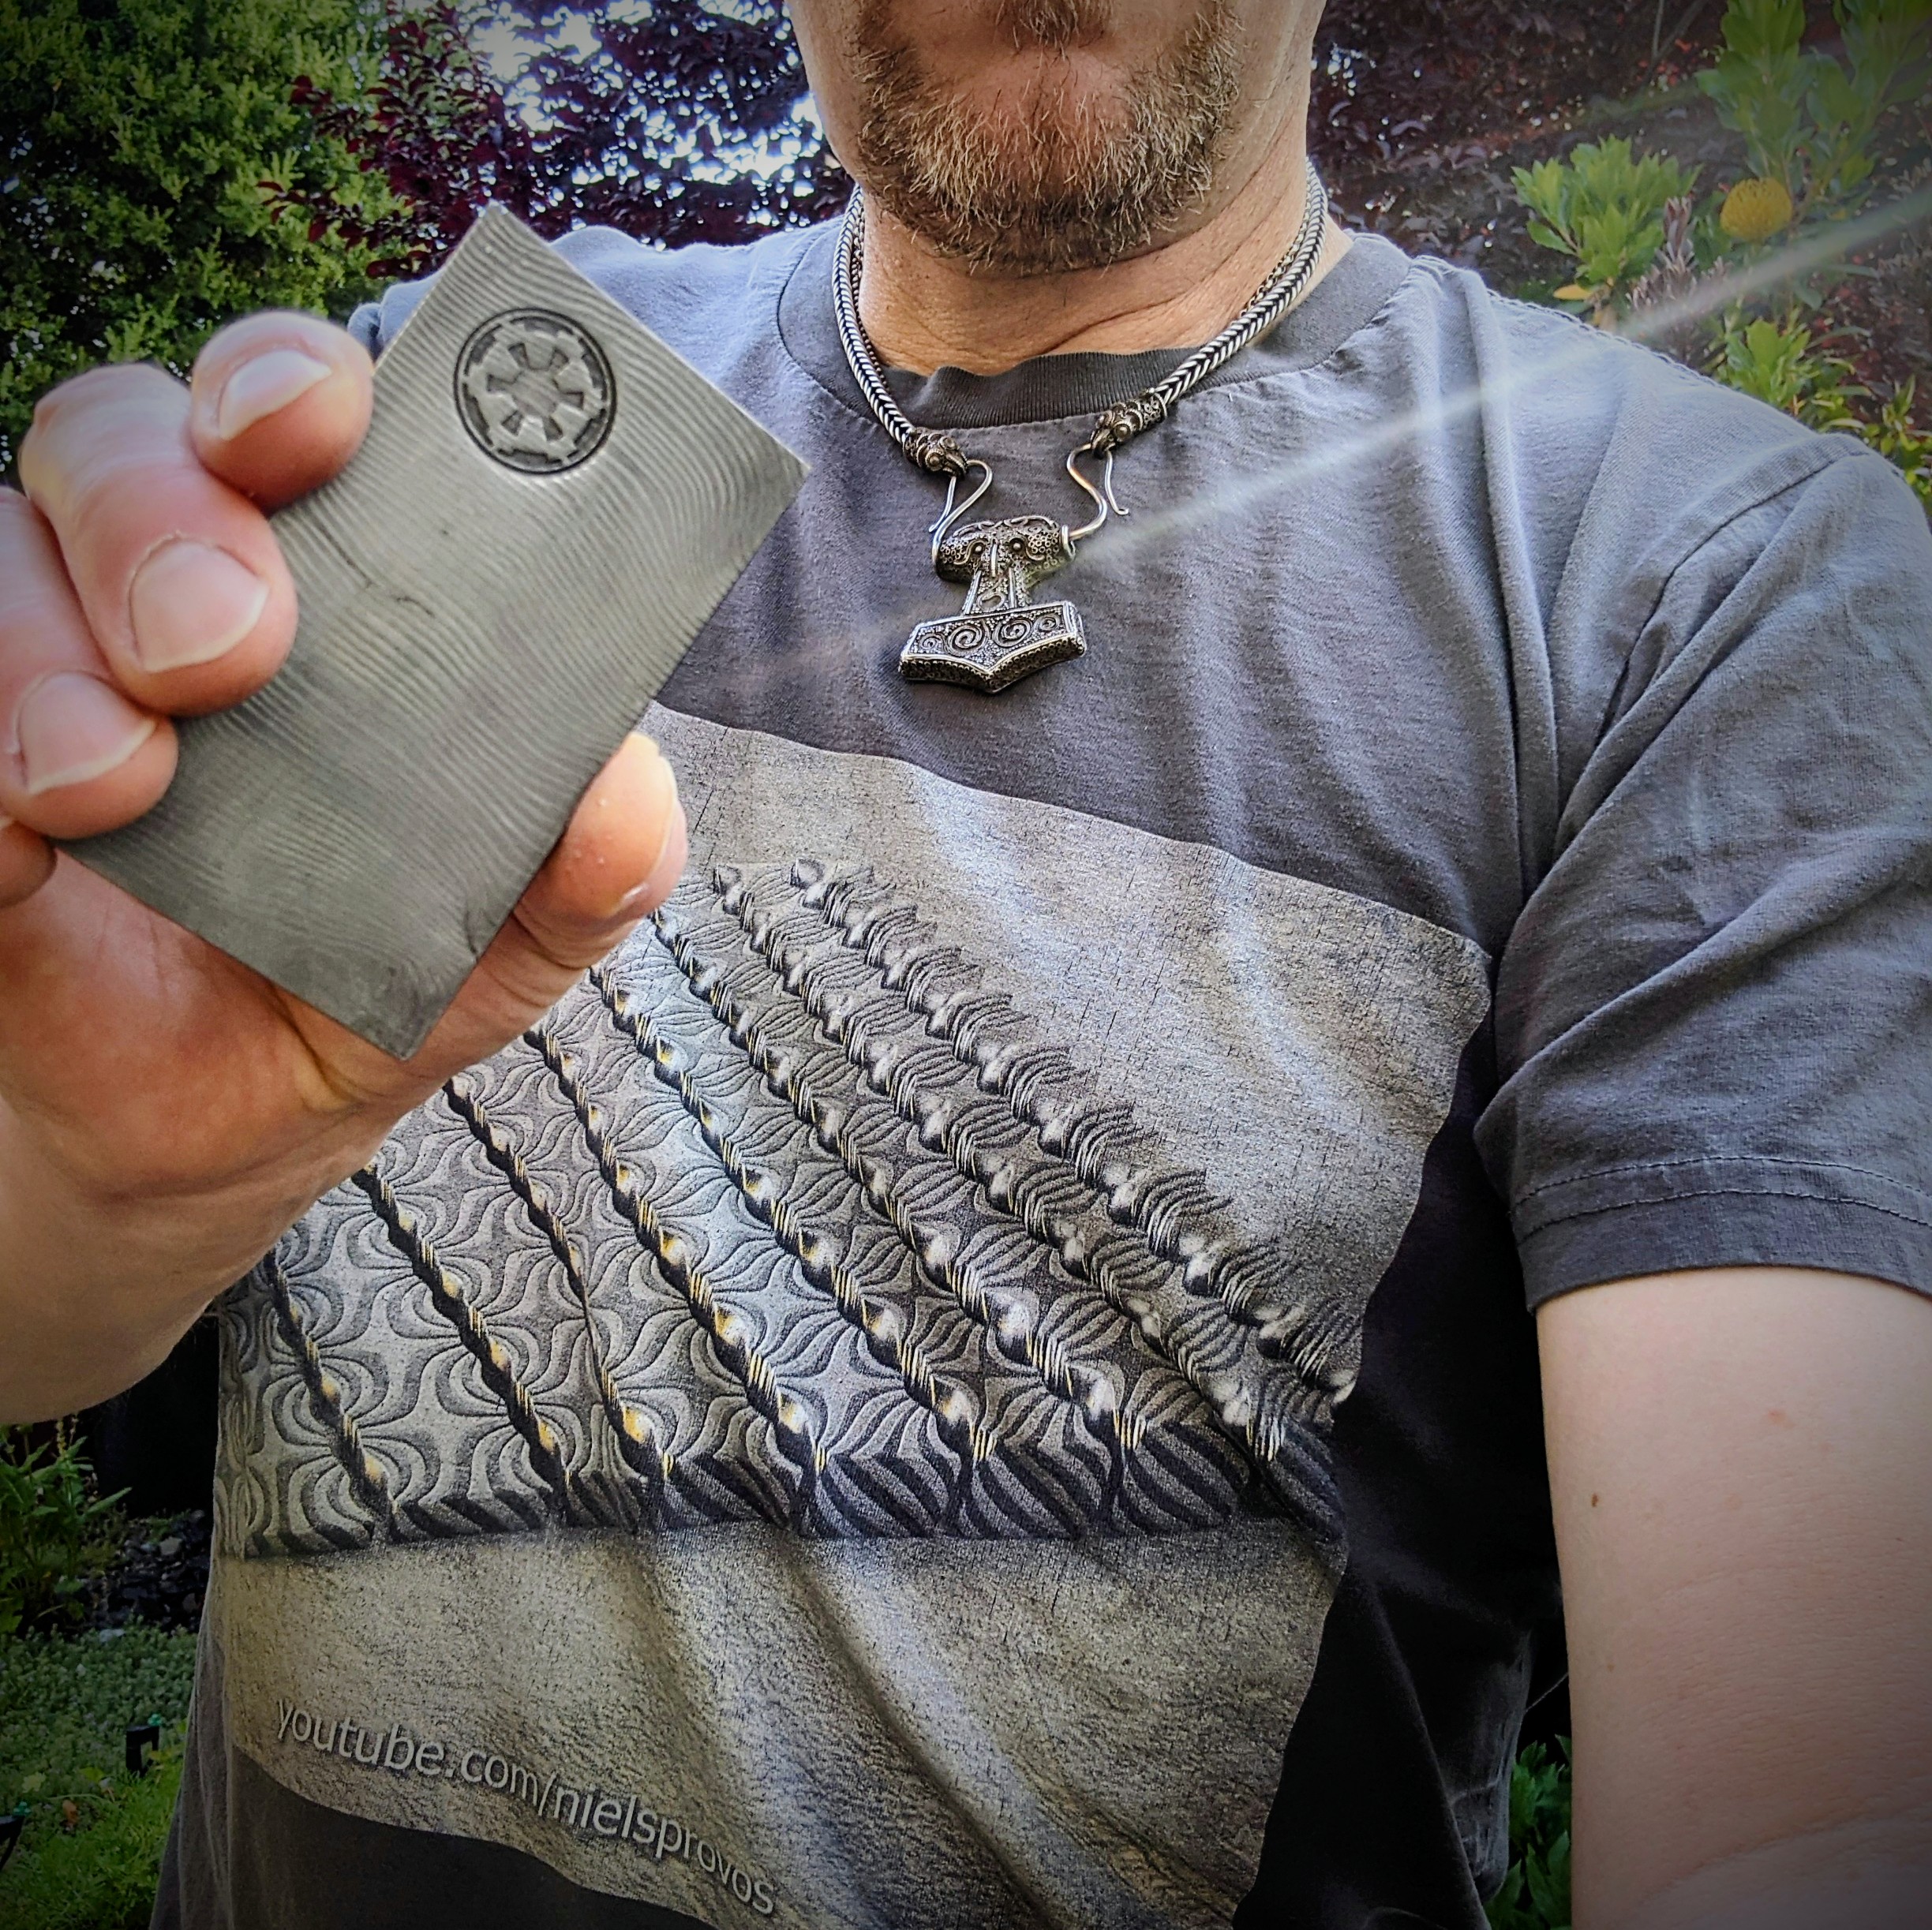 A completed Beskar ingot with Galactic Empire sigil stamped into it